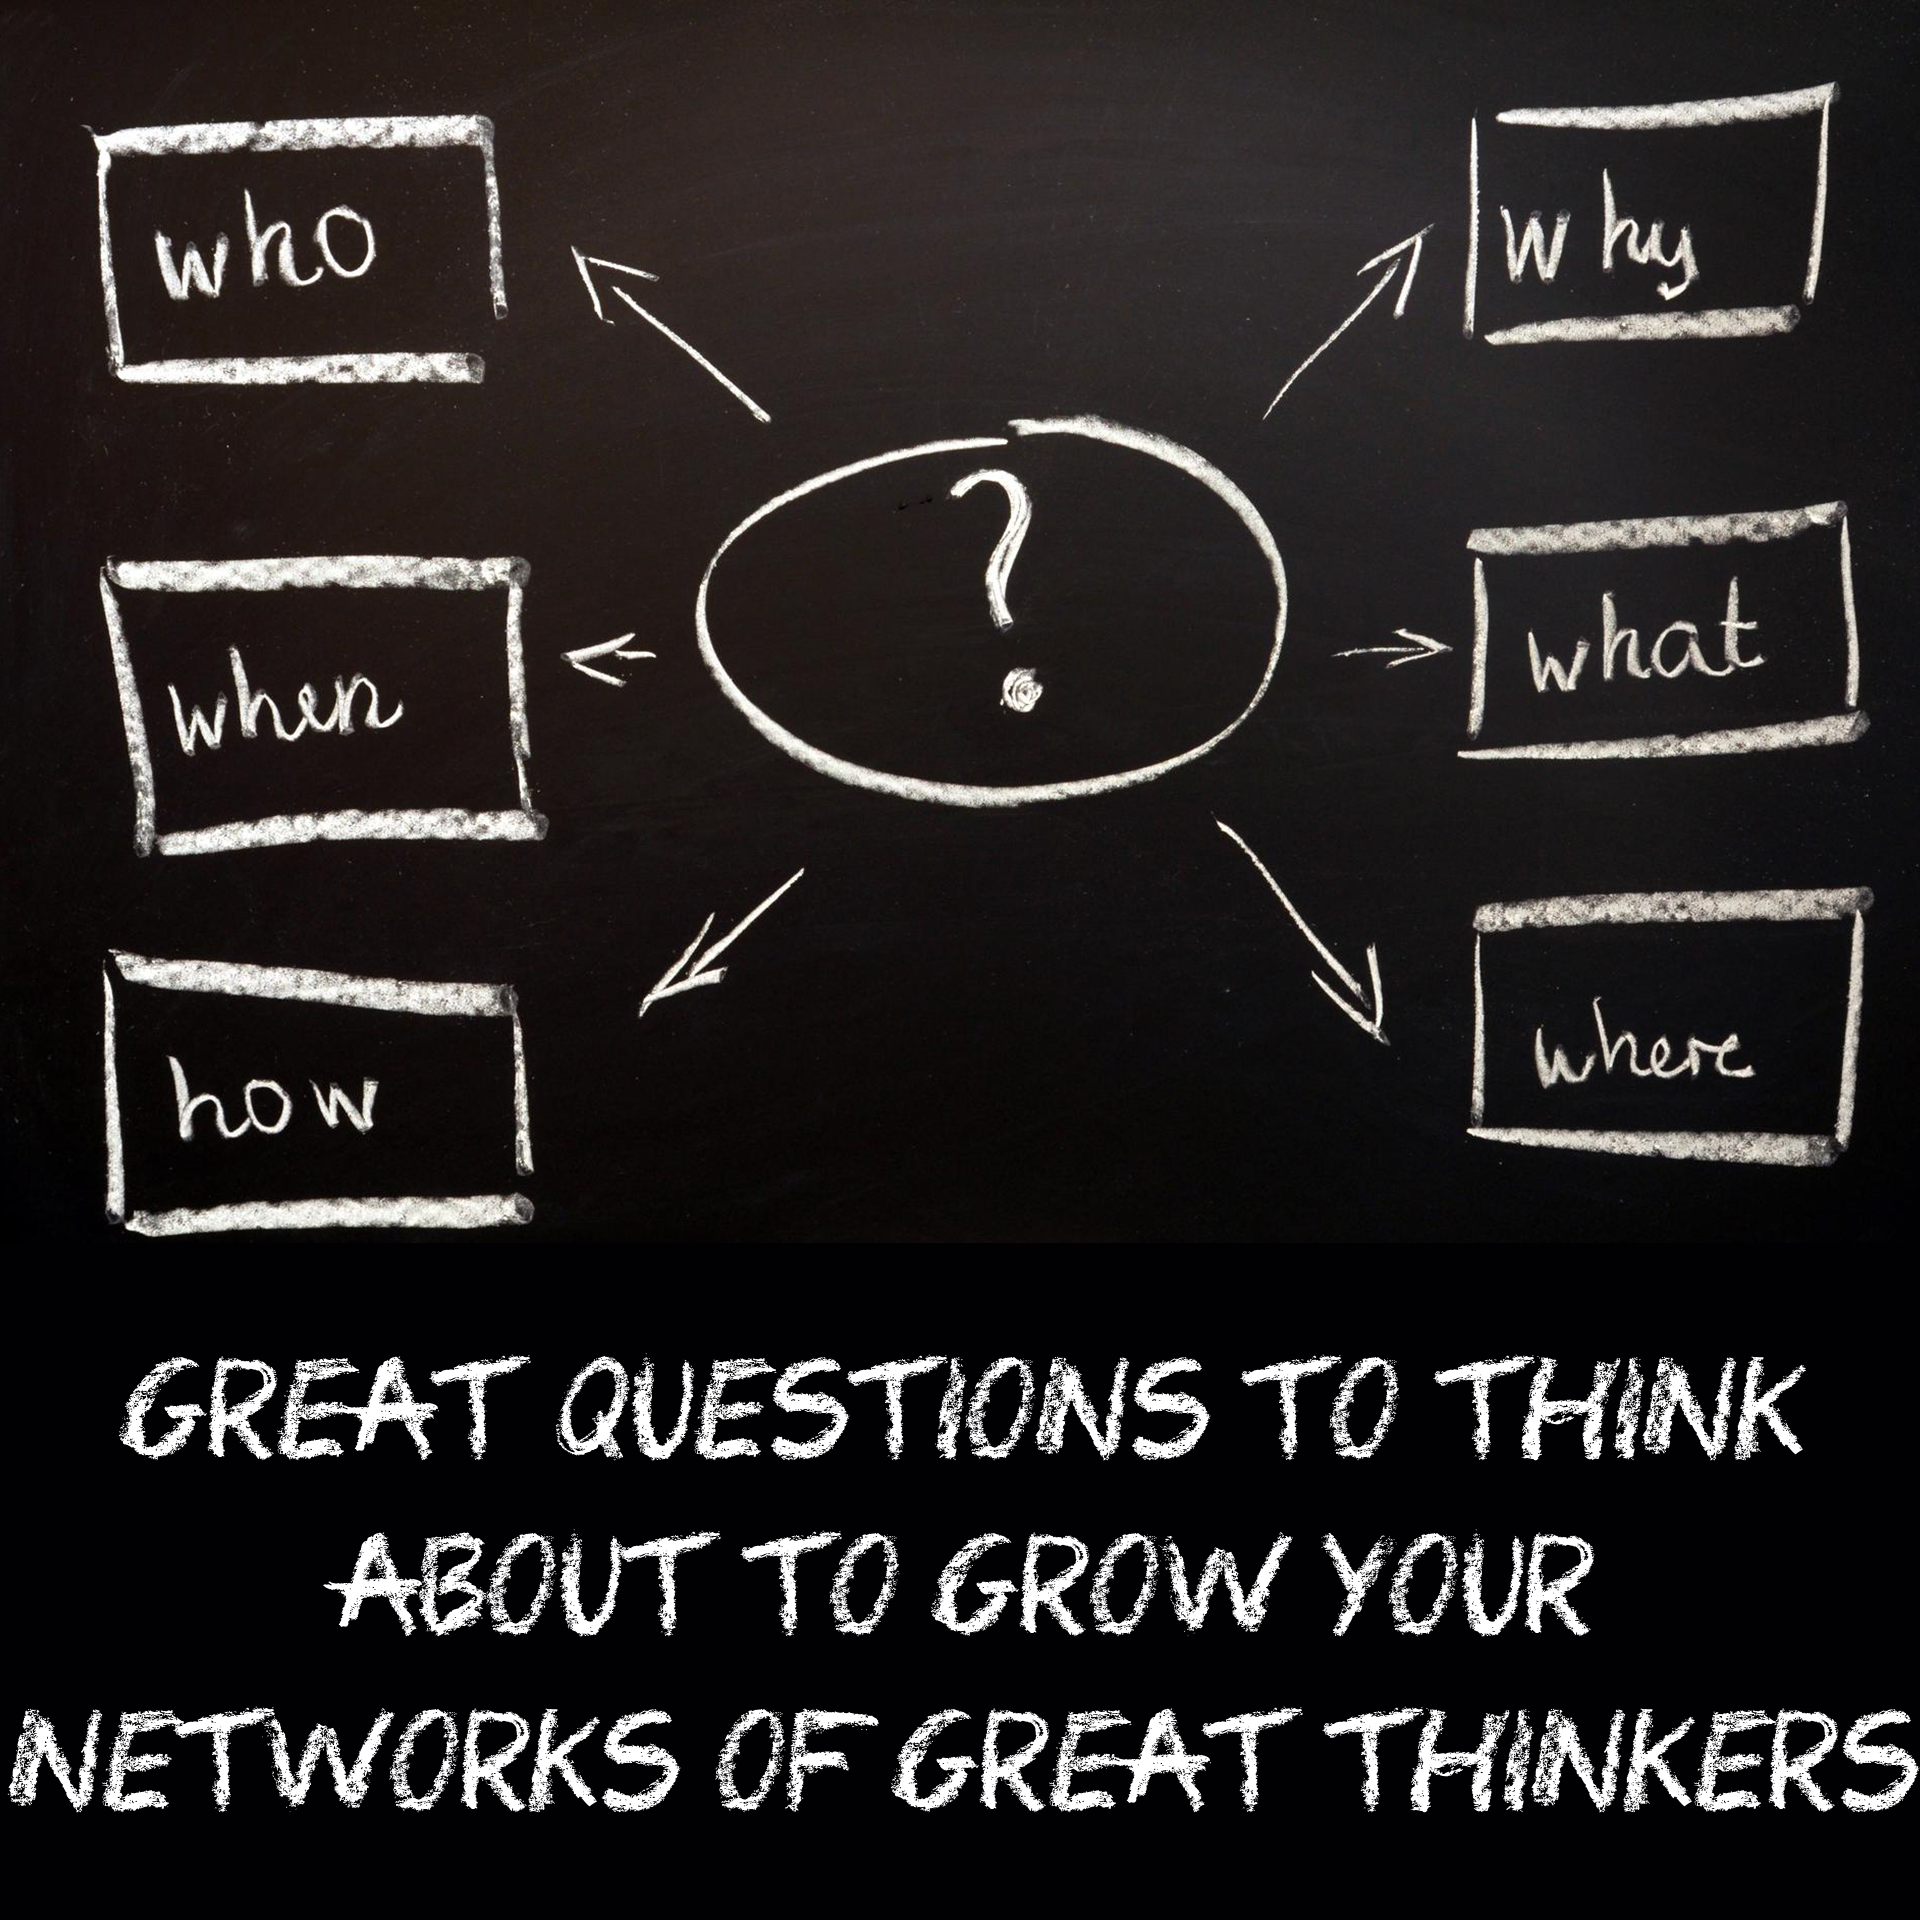 Great Questions for Planning to Grow Your Network Gerald Haman